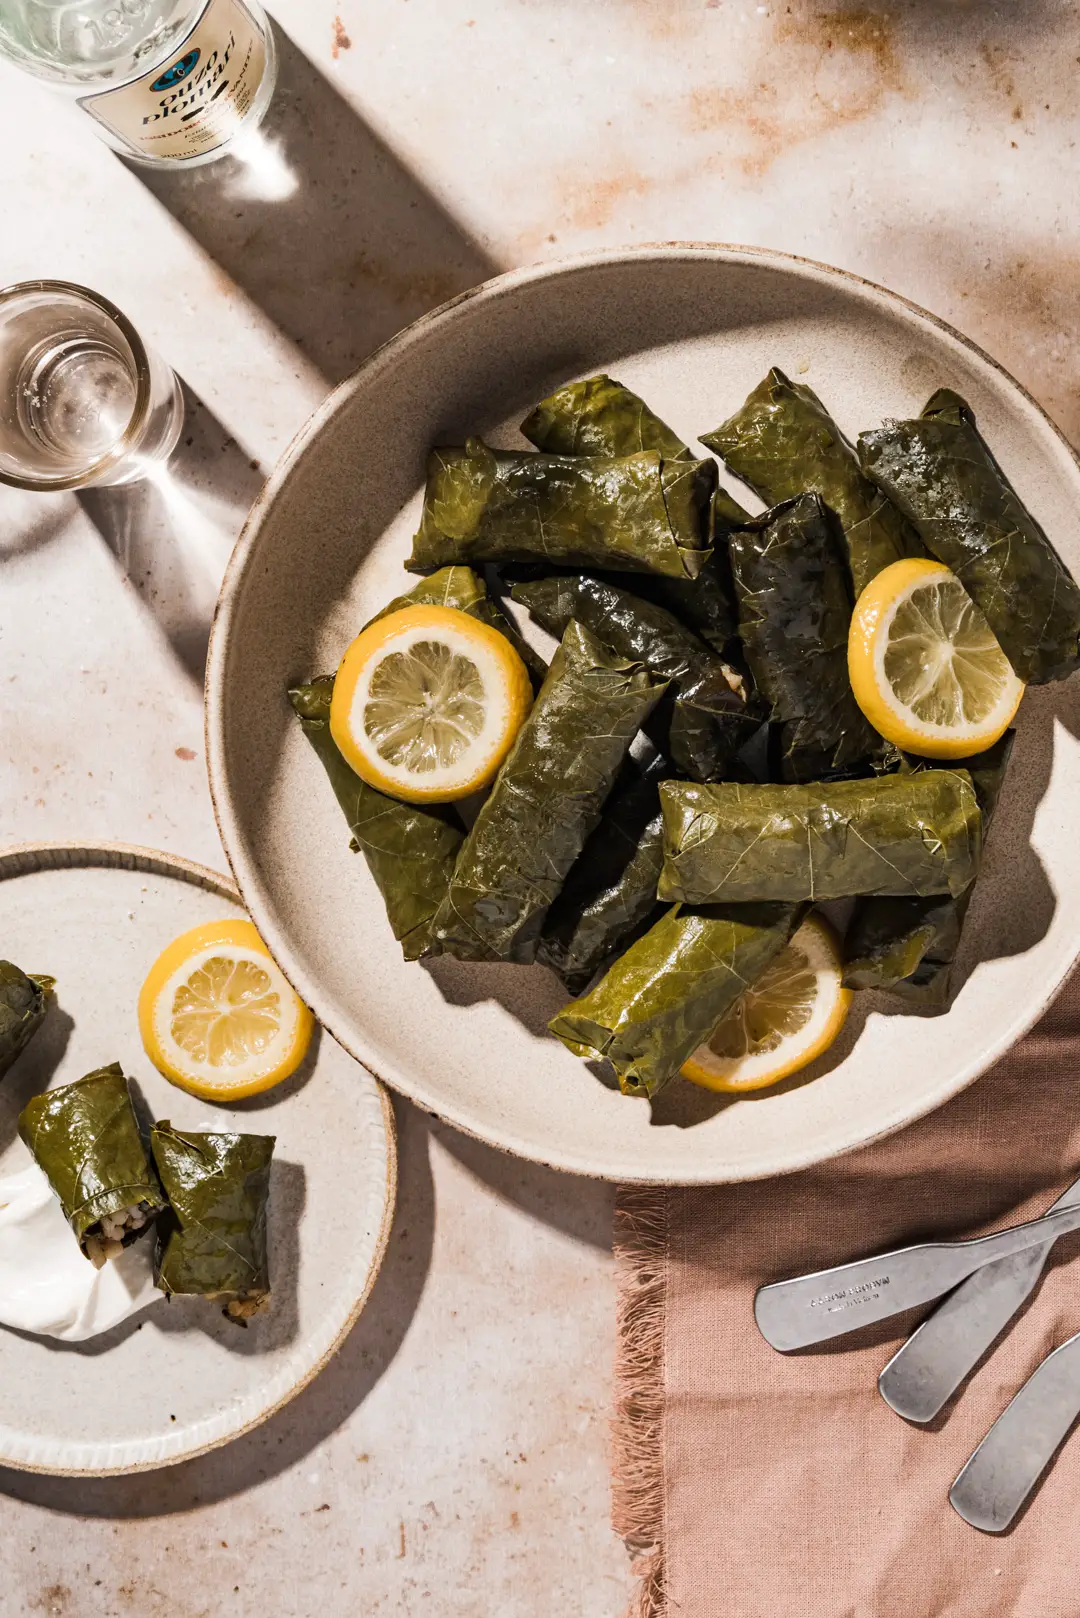 A favorite dish in Greece, these dolmades gialantzi - stuffed grape leaves are flavored with fresh herbs, onion, lemon, tomato & pine nuts.